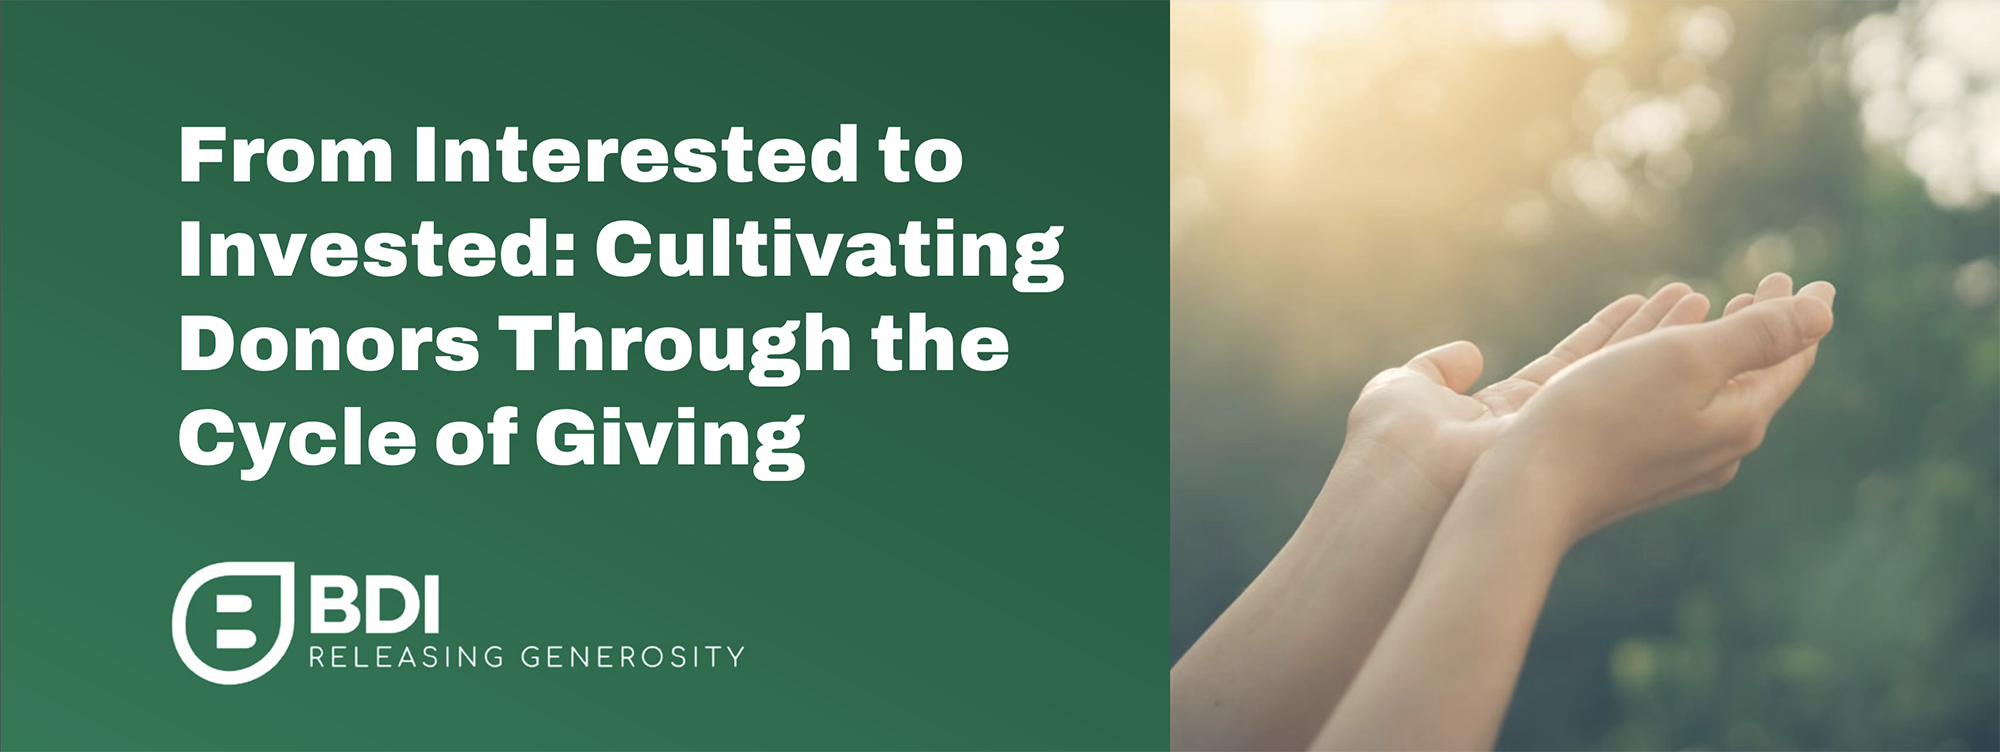 Cultivate Donors through the Cycle of Giving